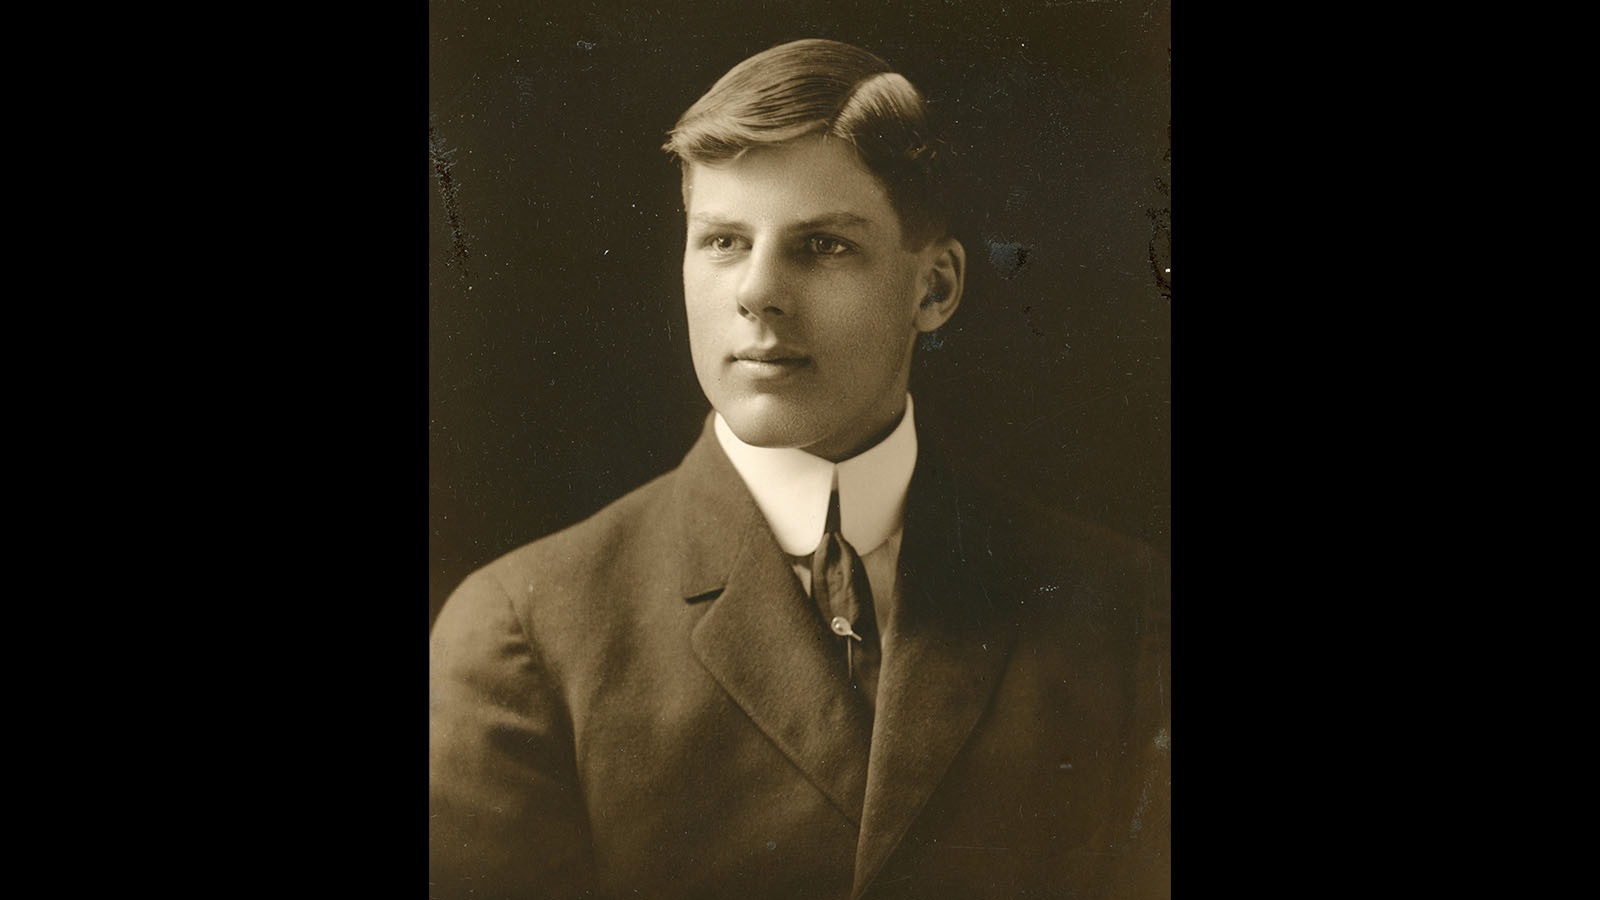 Bob David in 1912. He would go on to serve in World War I and leave a legacy of historical information for the state.